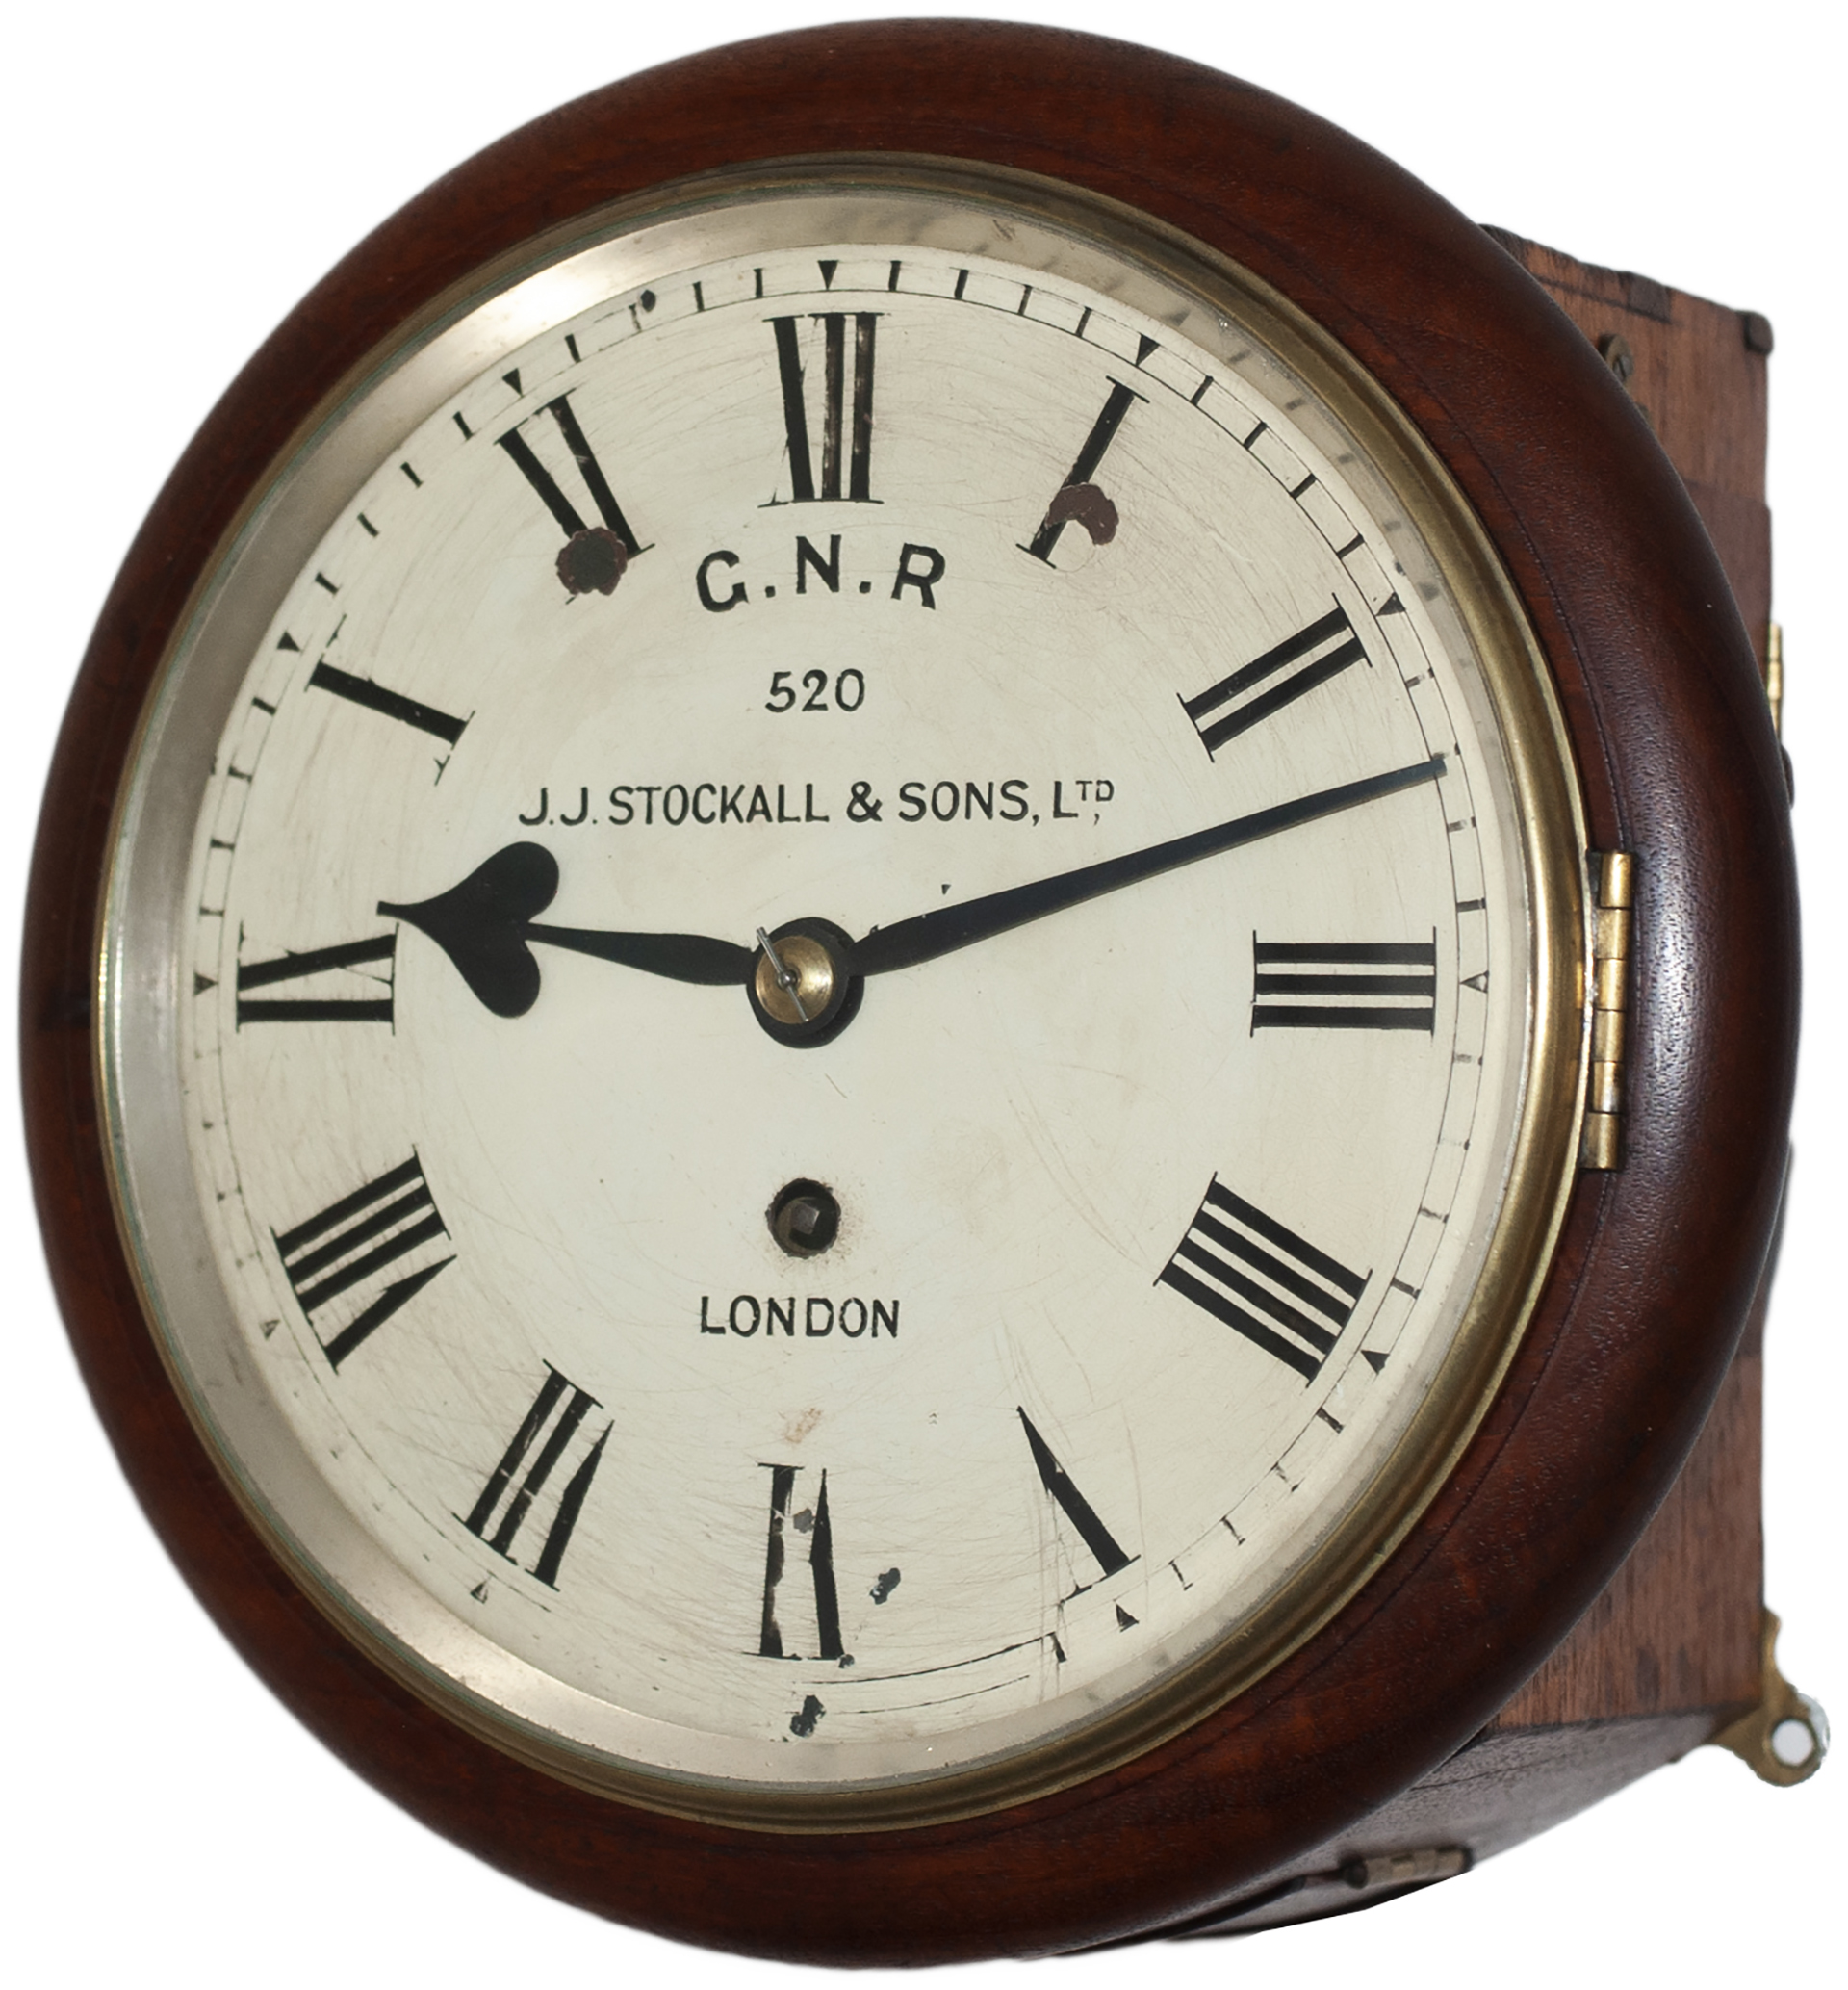 Great Northern Railway 8 inch mahogany cased fusee railway clock with a cast brass bezel and a